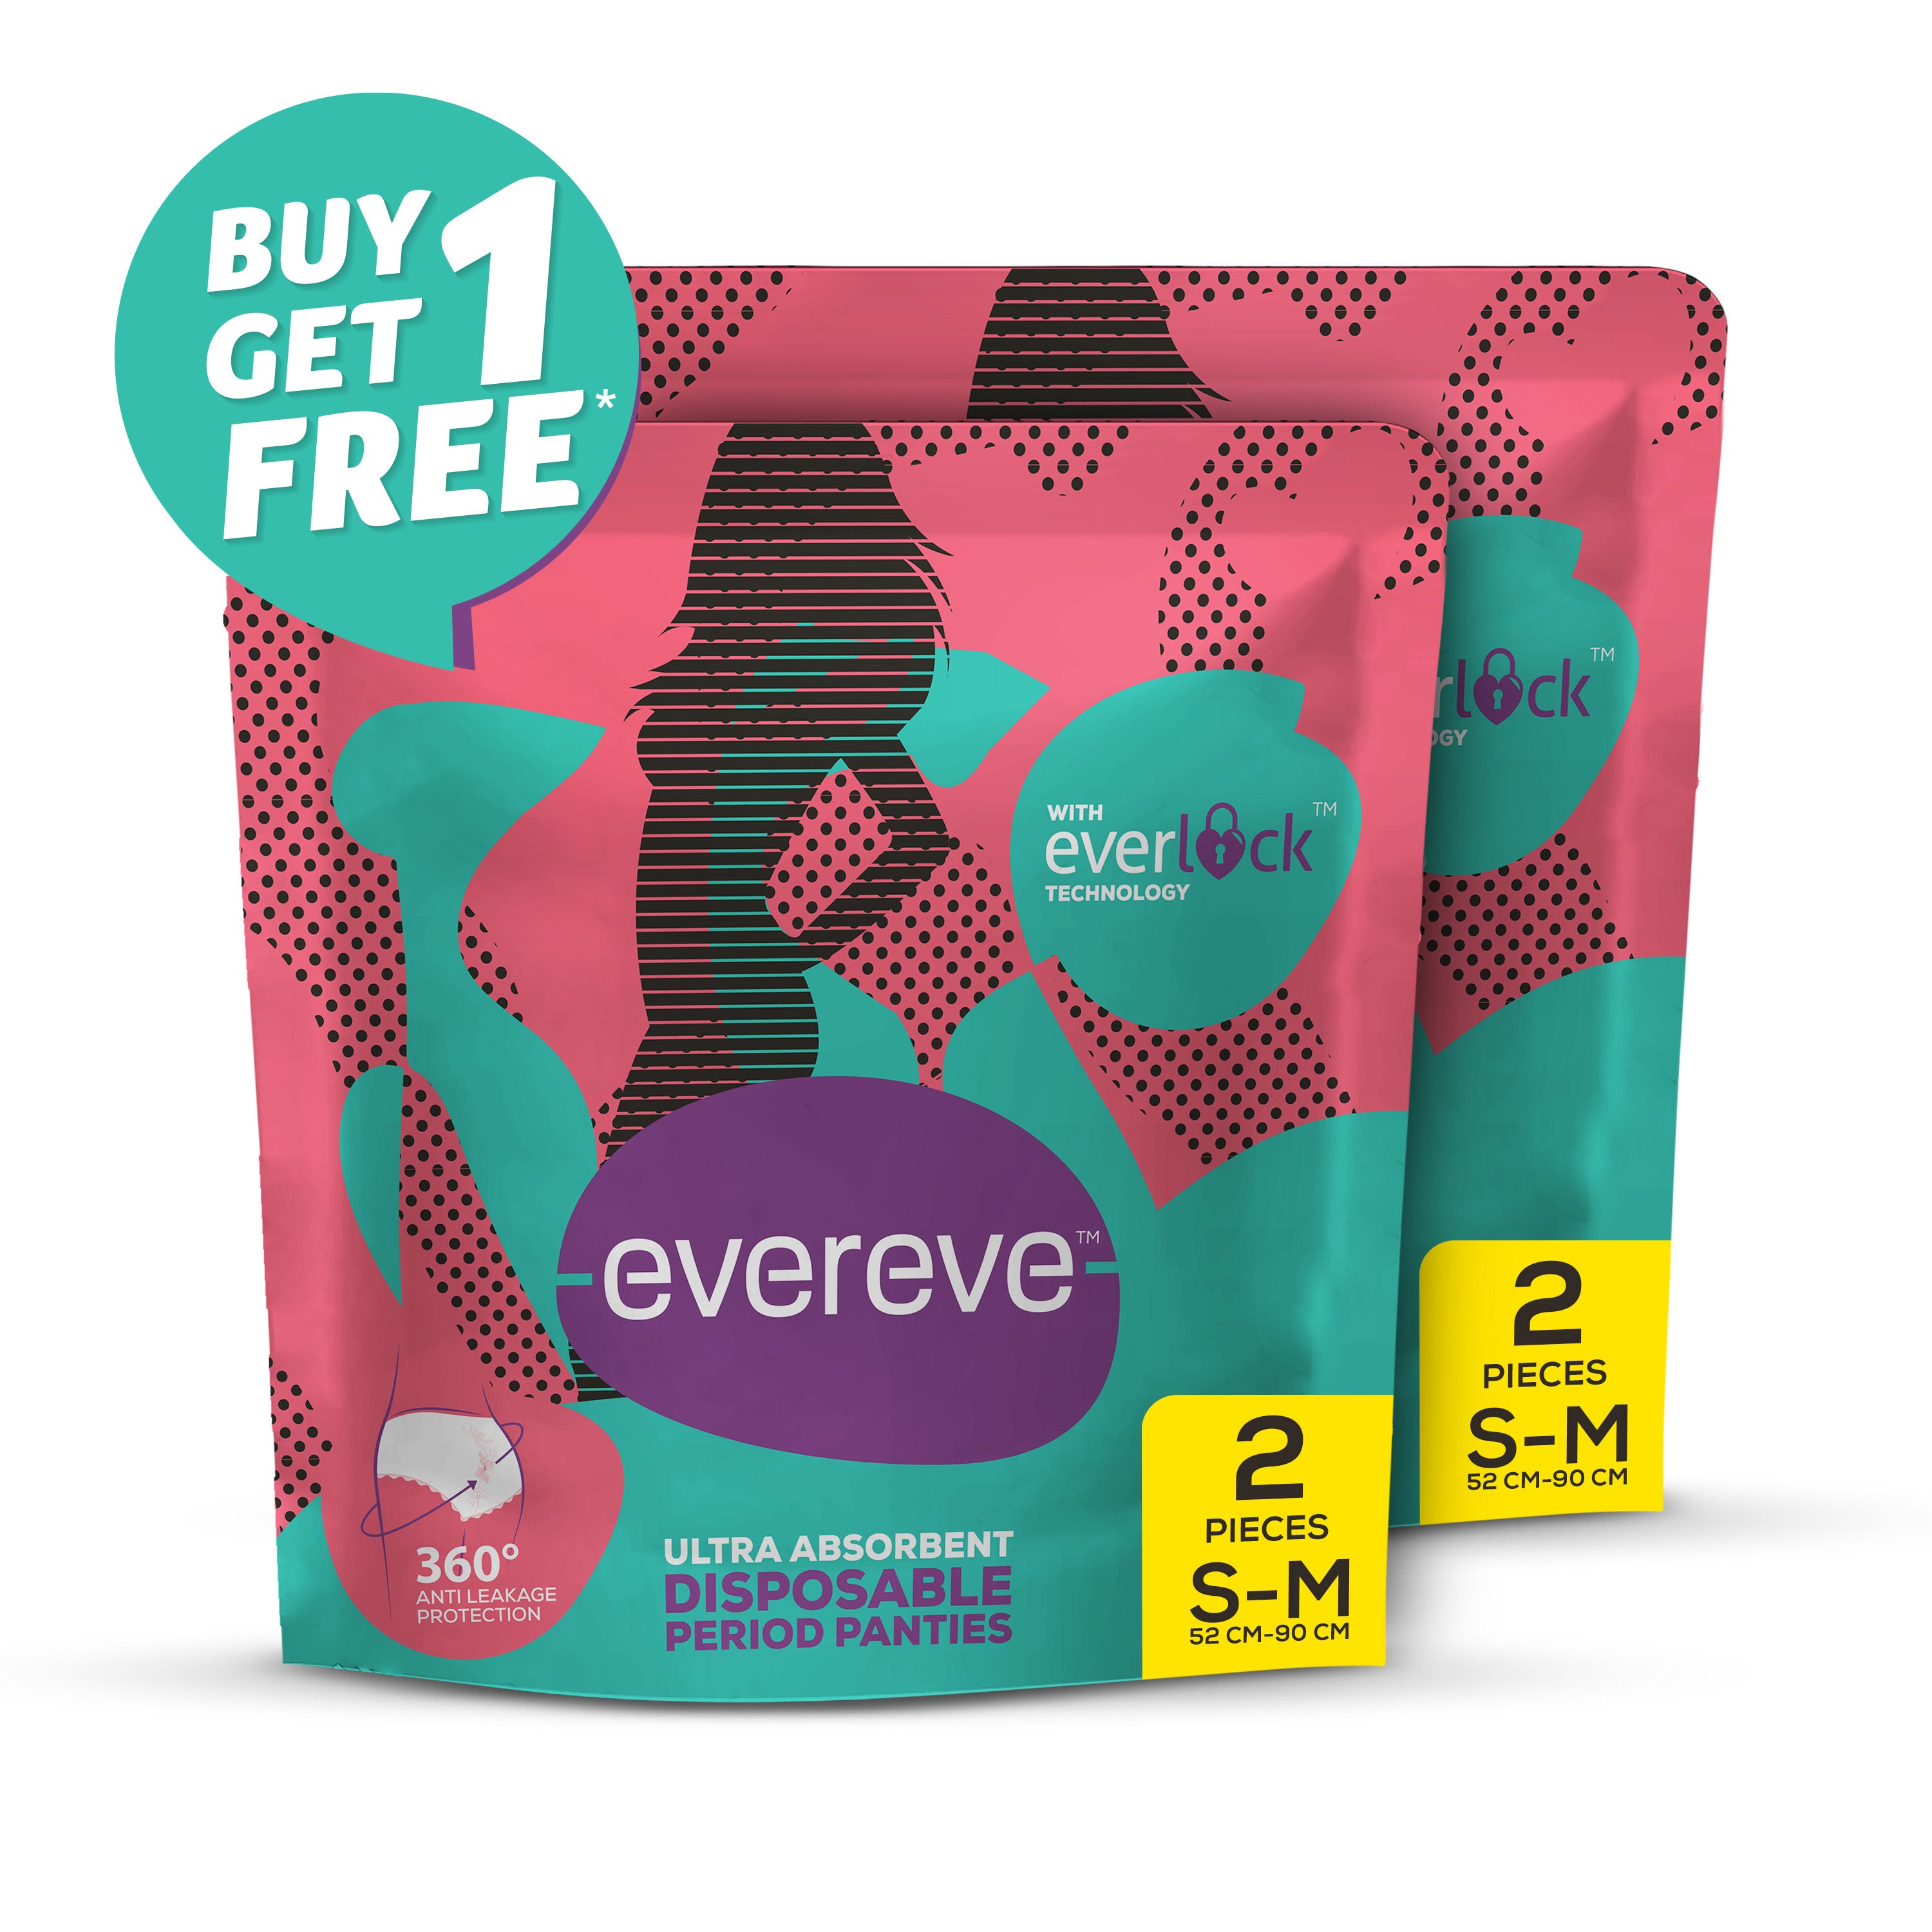 Evereve Ultra Absorbent Disposable Period Panties, S-M, 2's Pack